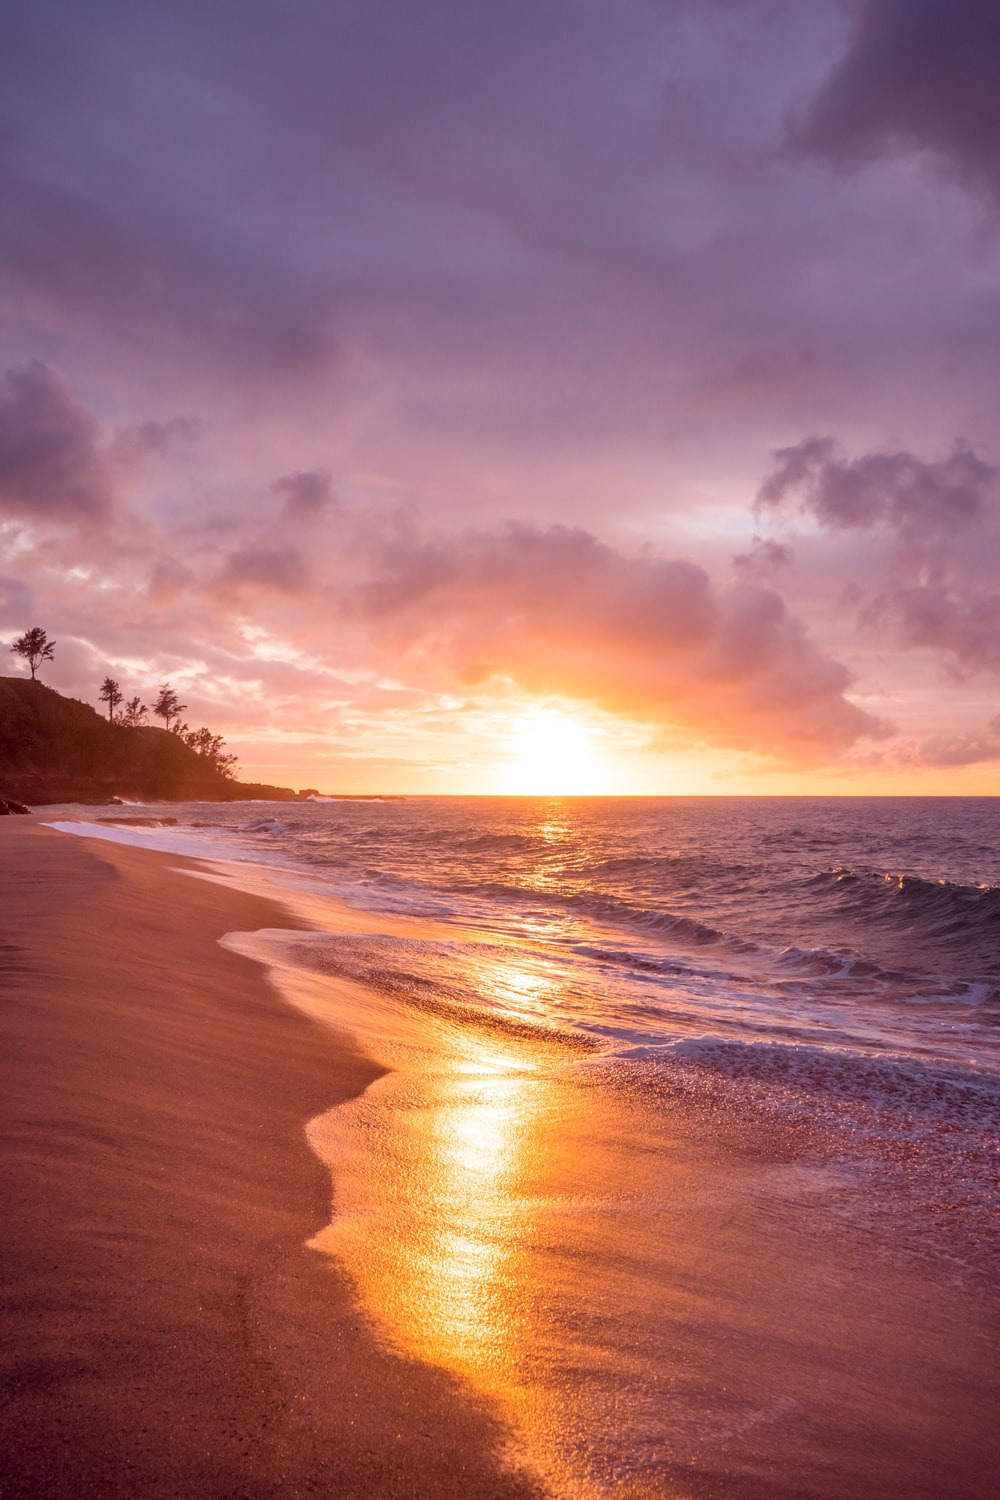 Beach Sunrise Picture [Stunning!]. Download Free Image